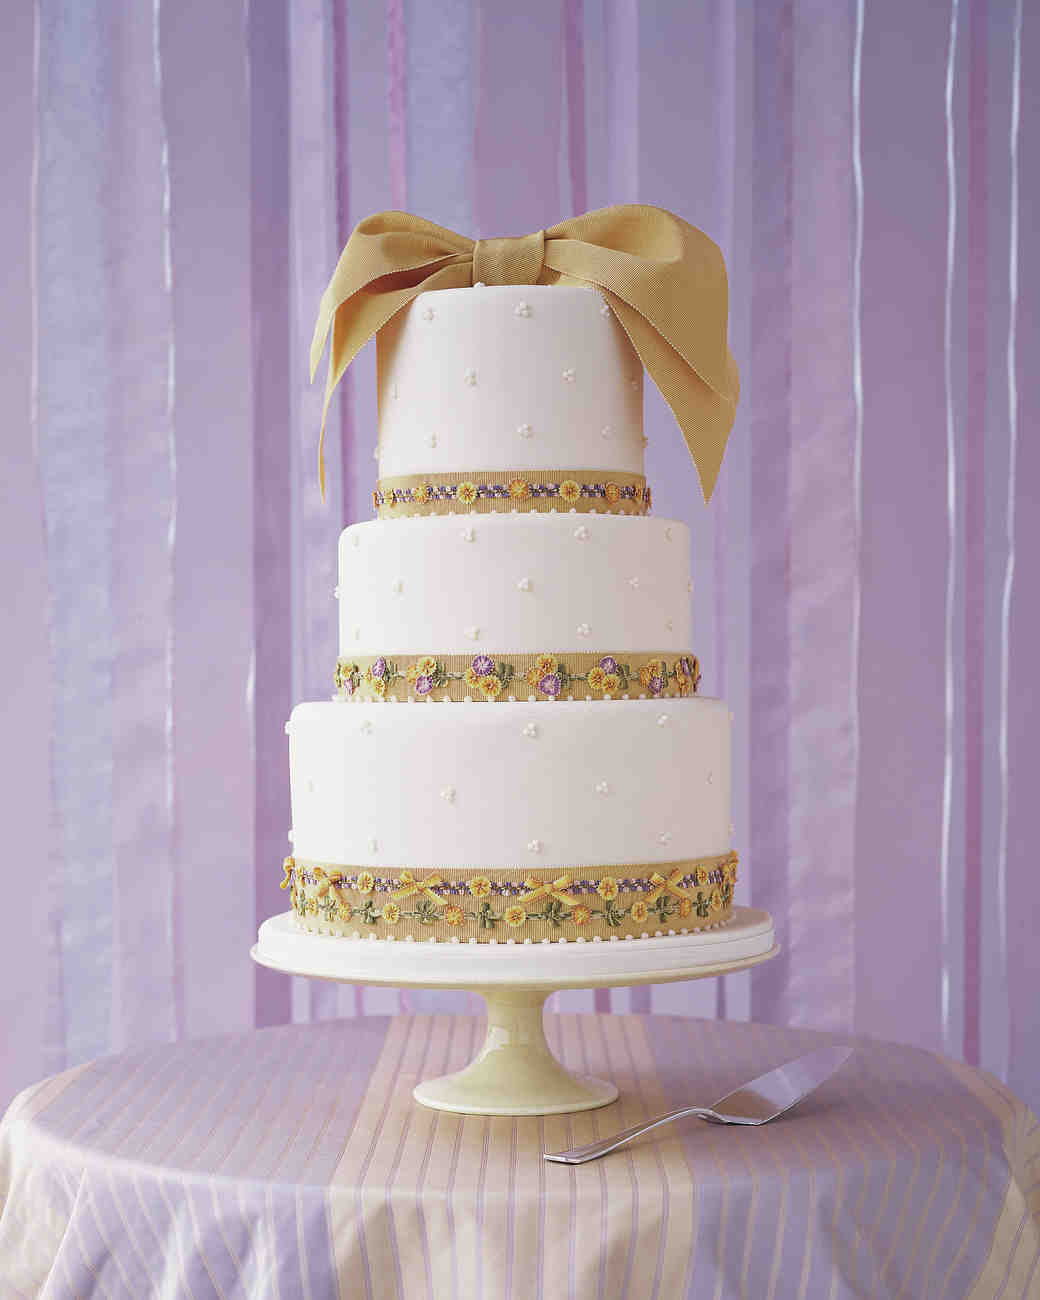 Wedding Cakes With Bow
 18 Beautiful Wedding Cakes Decorated With Bows